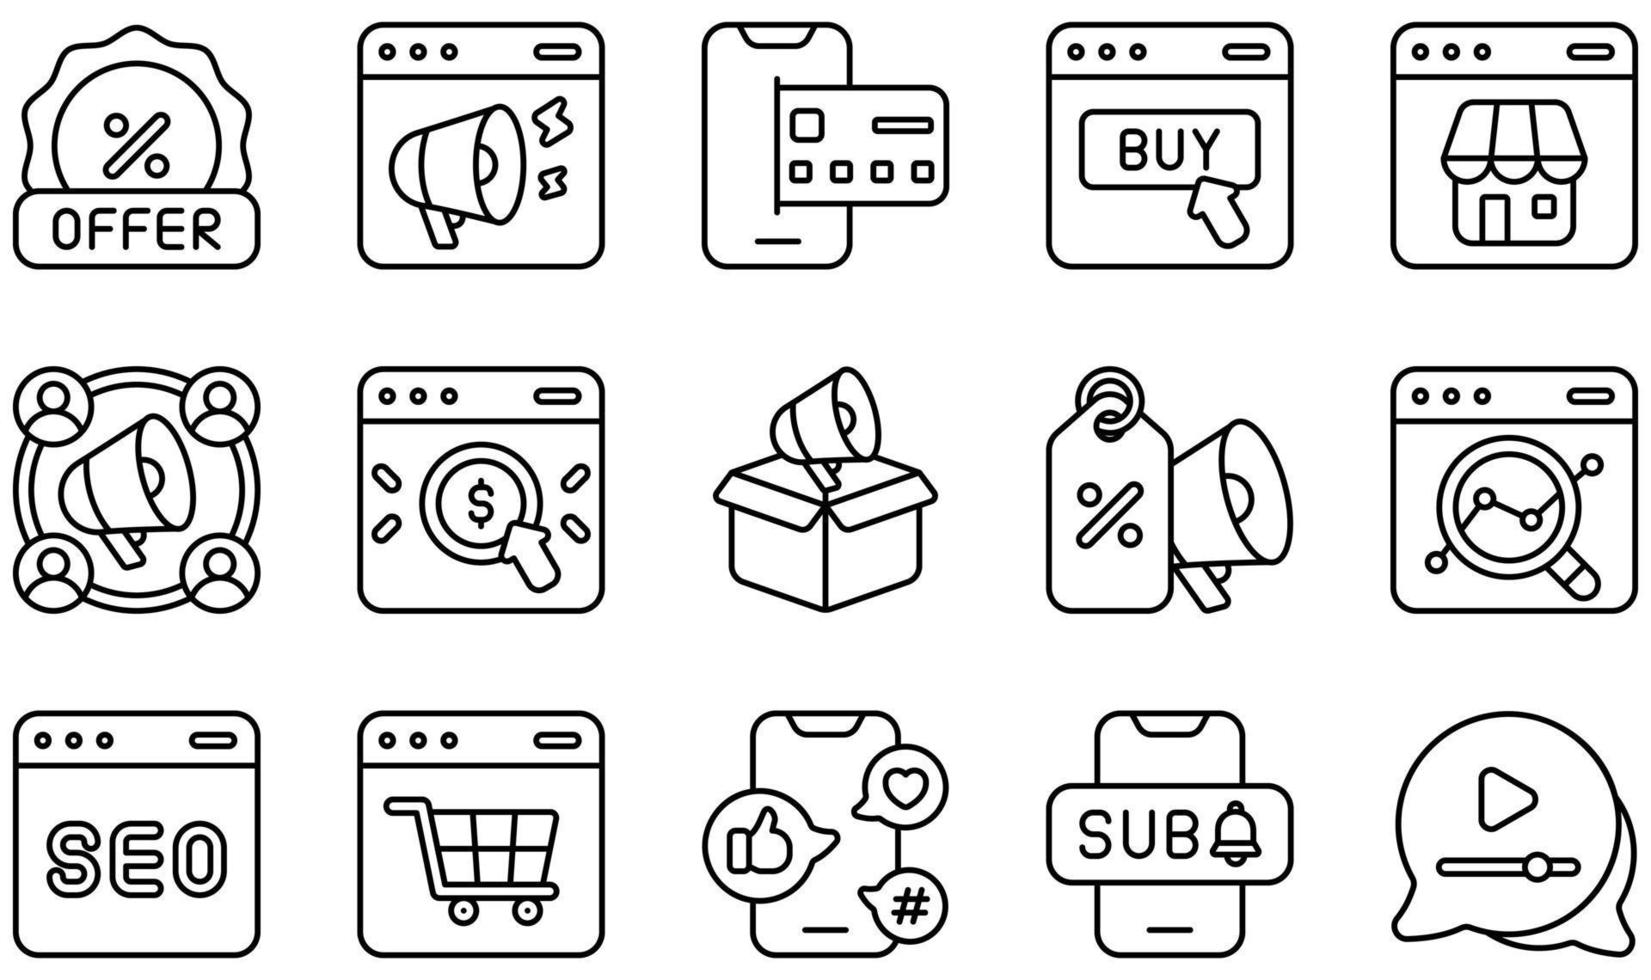 Set of Vector Icons Related to Online Marketing. Contains such Icons as Online Marketing, Online Payment, Online Shopping, Online Store, Outbound Marketing, Seo and more.